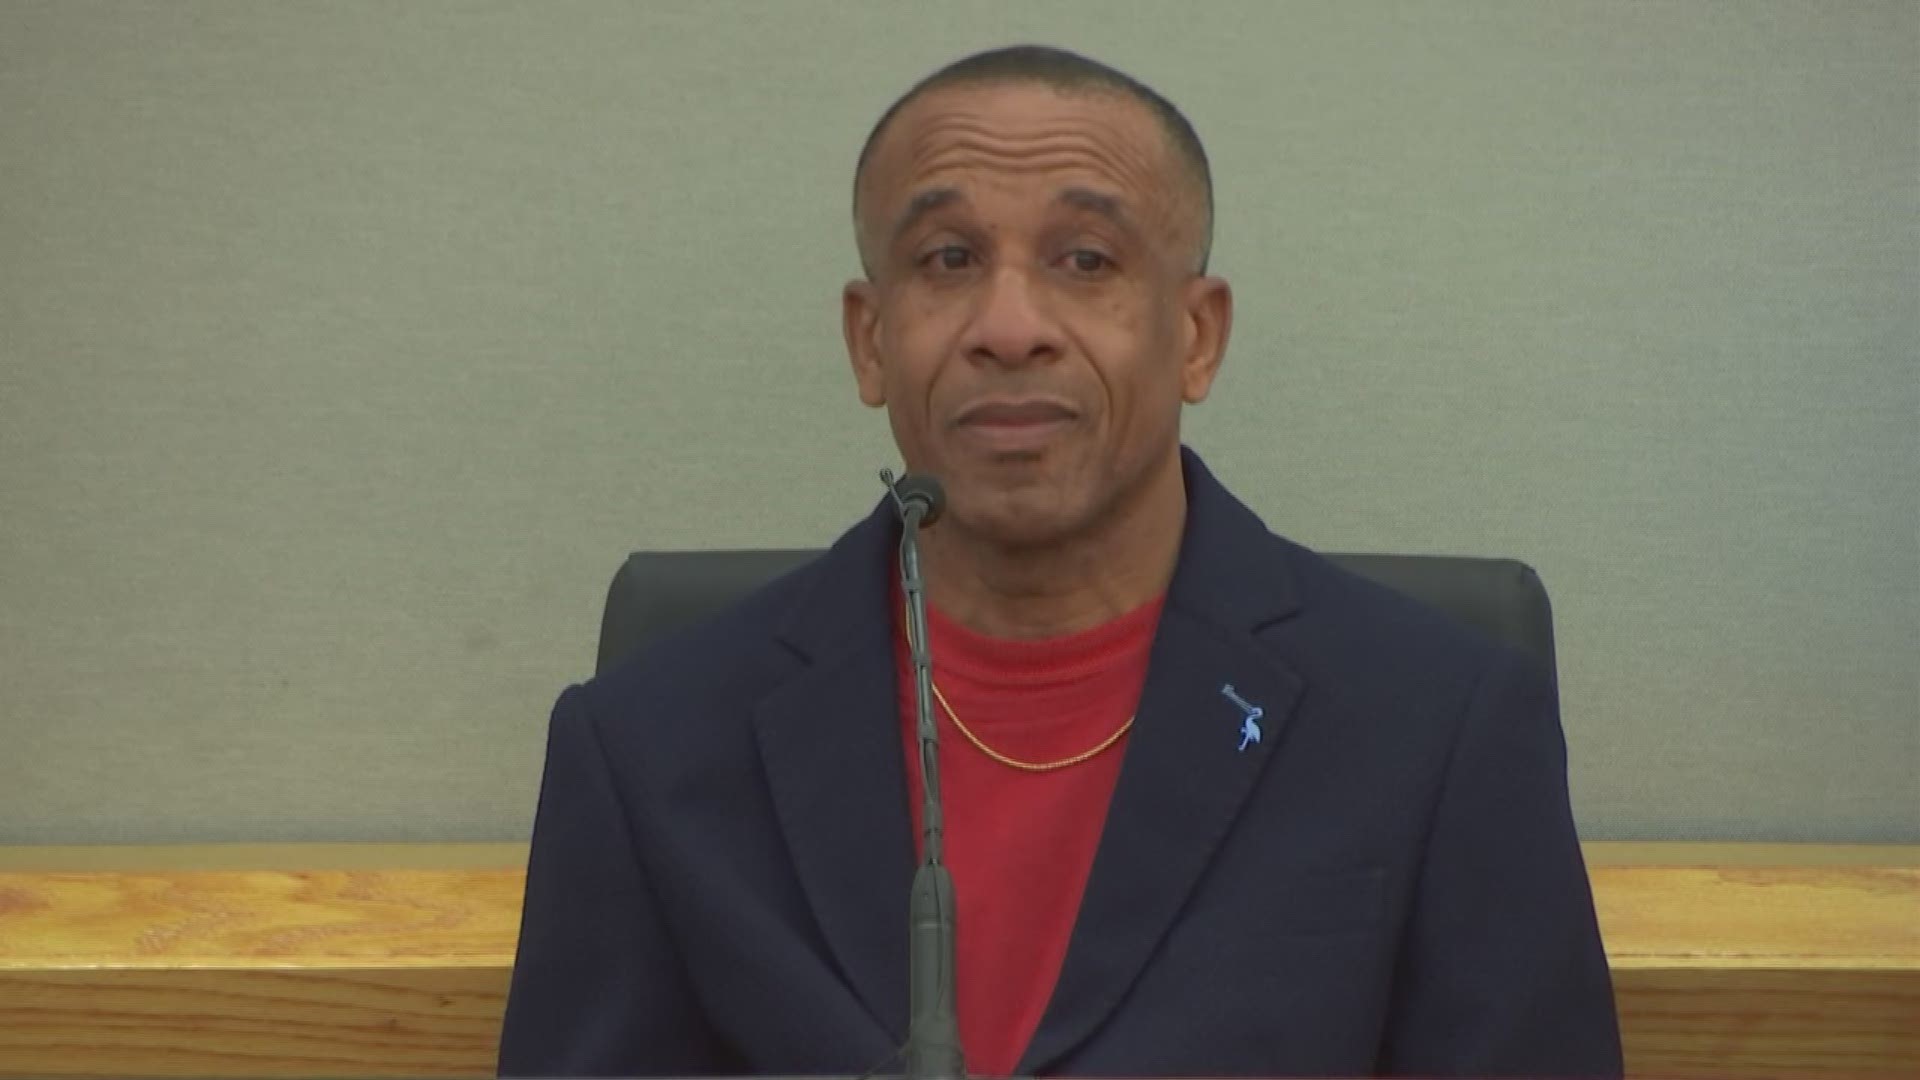 Botham Jean's father Bertrum took the stand Wednesday to give emotional testimony during the punishment phase of Amber Guyger's trial.